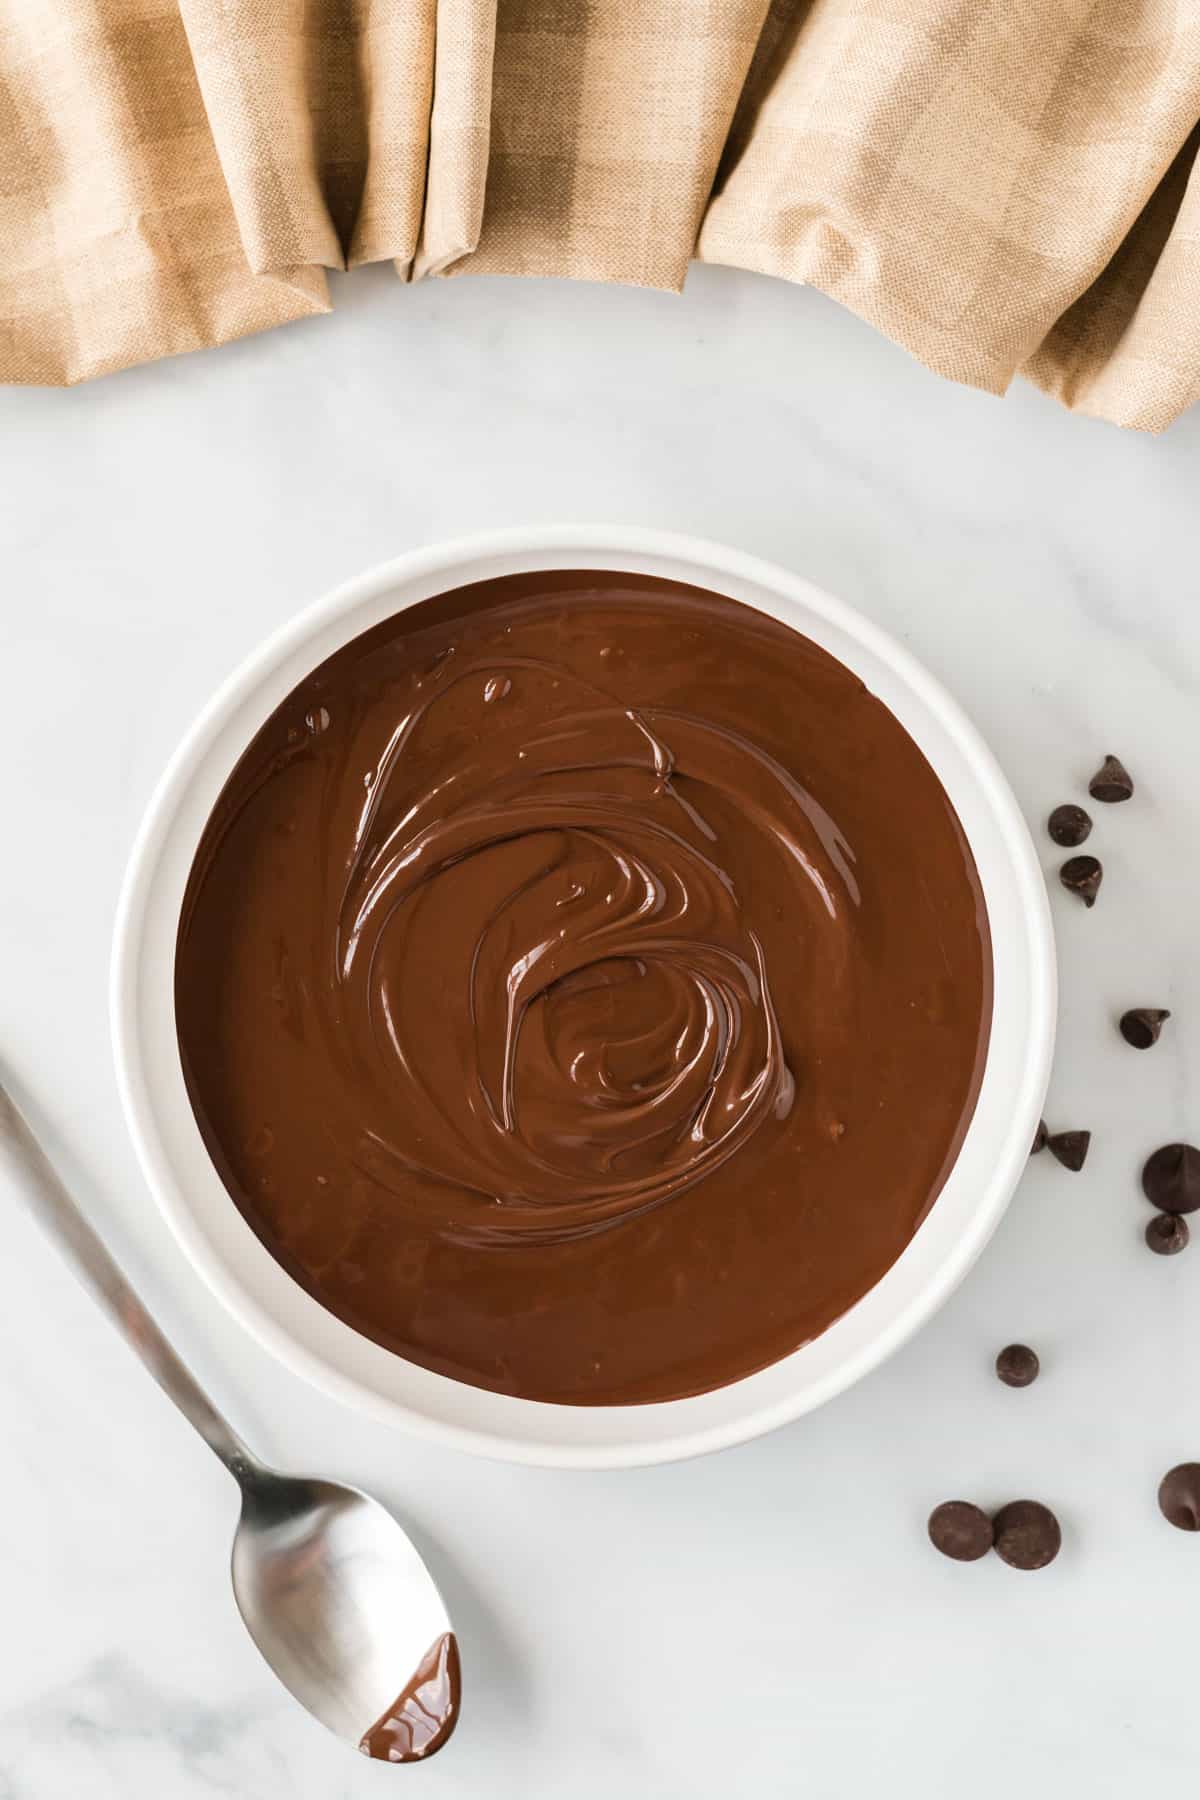 melted chocolate in a bowl